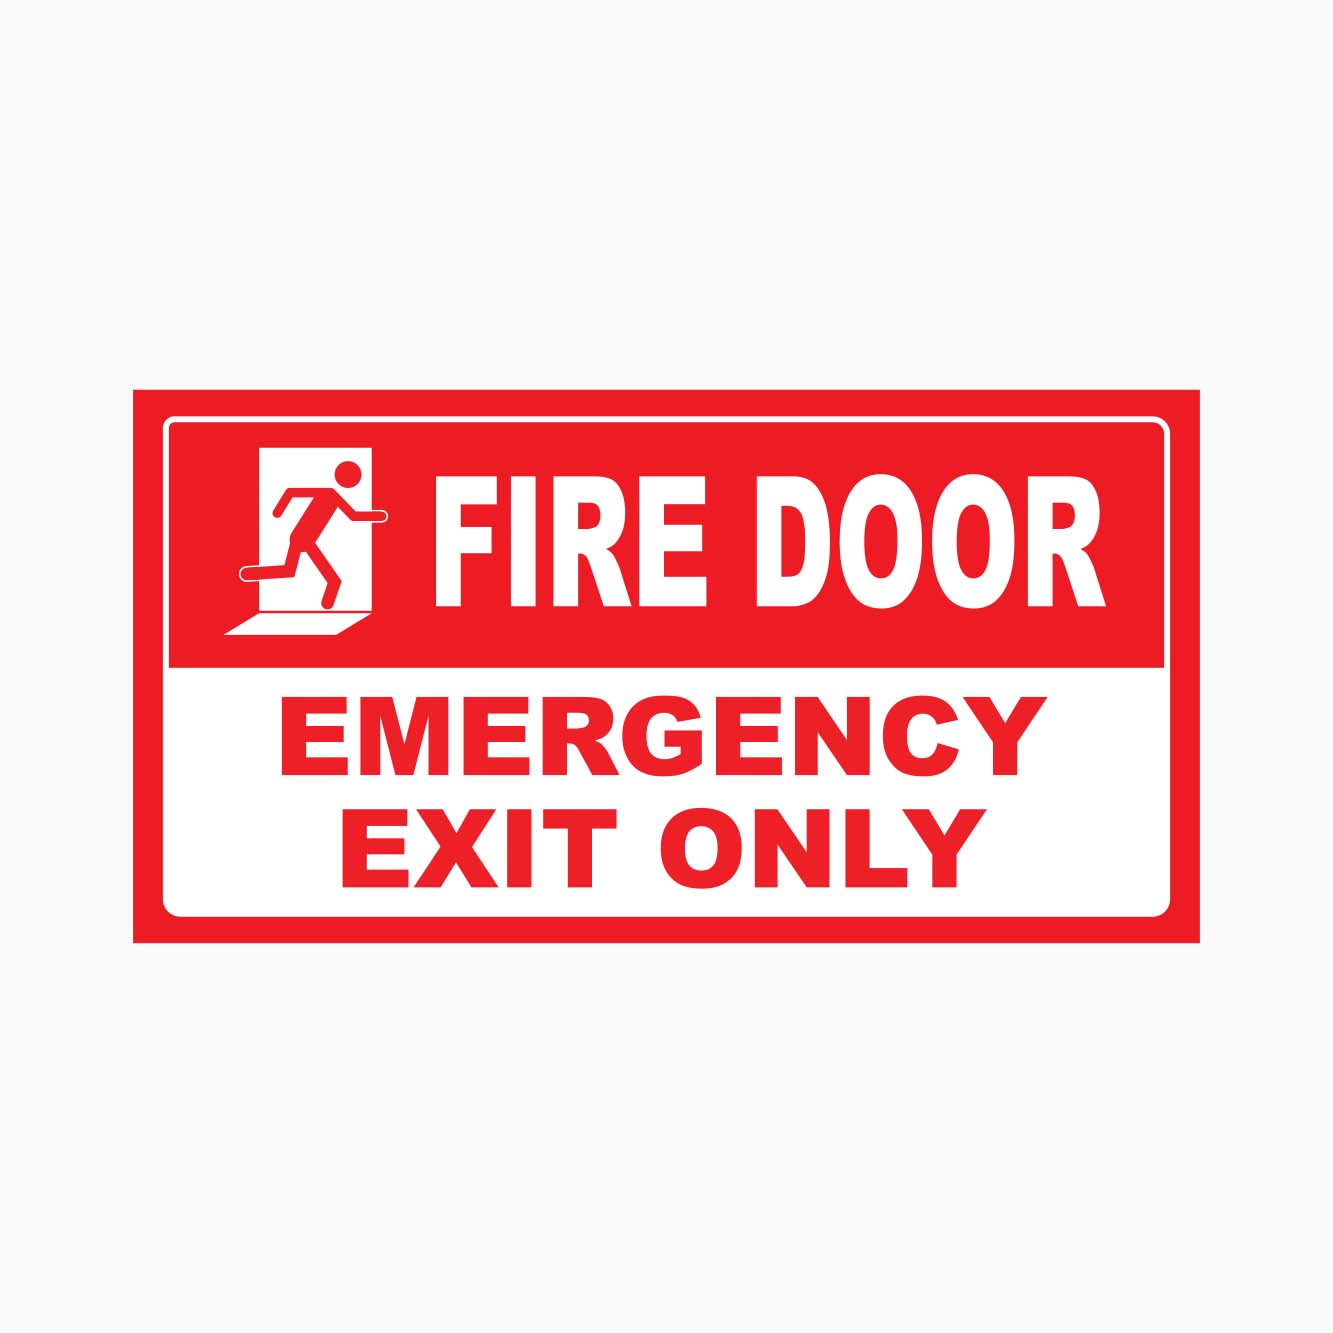 Fire Door Safety Signs in Australia | Get Signs